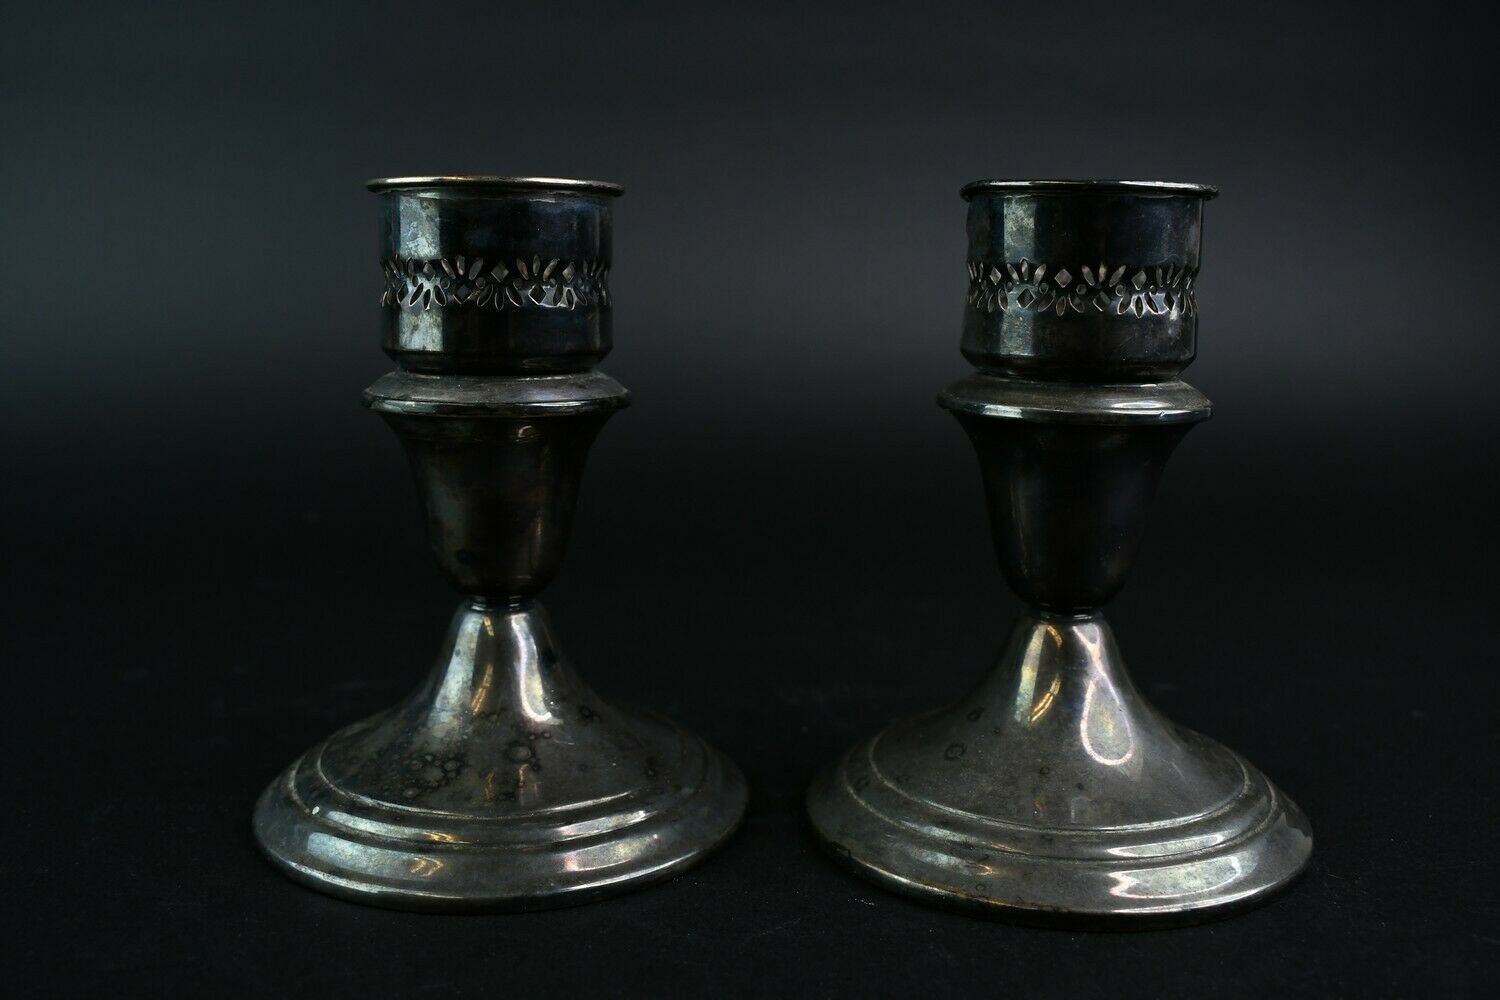 Set Of 2 Gorham Silver Plated Weighted YC 3003 Candle Holders W/Screw-On GI Tops